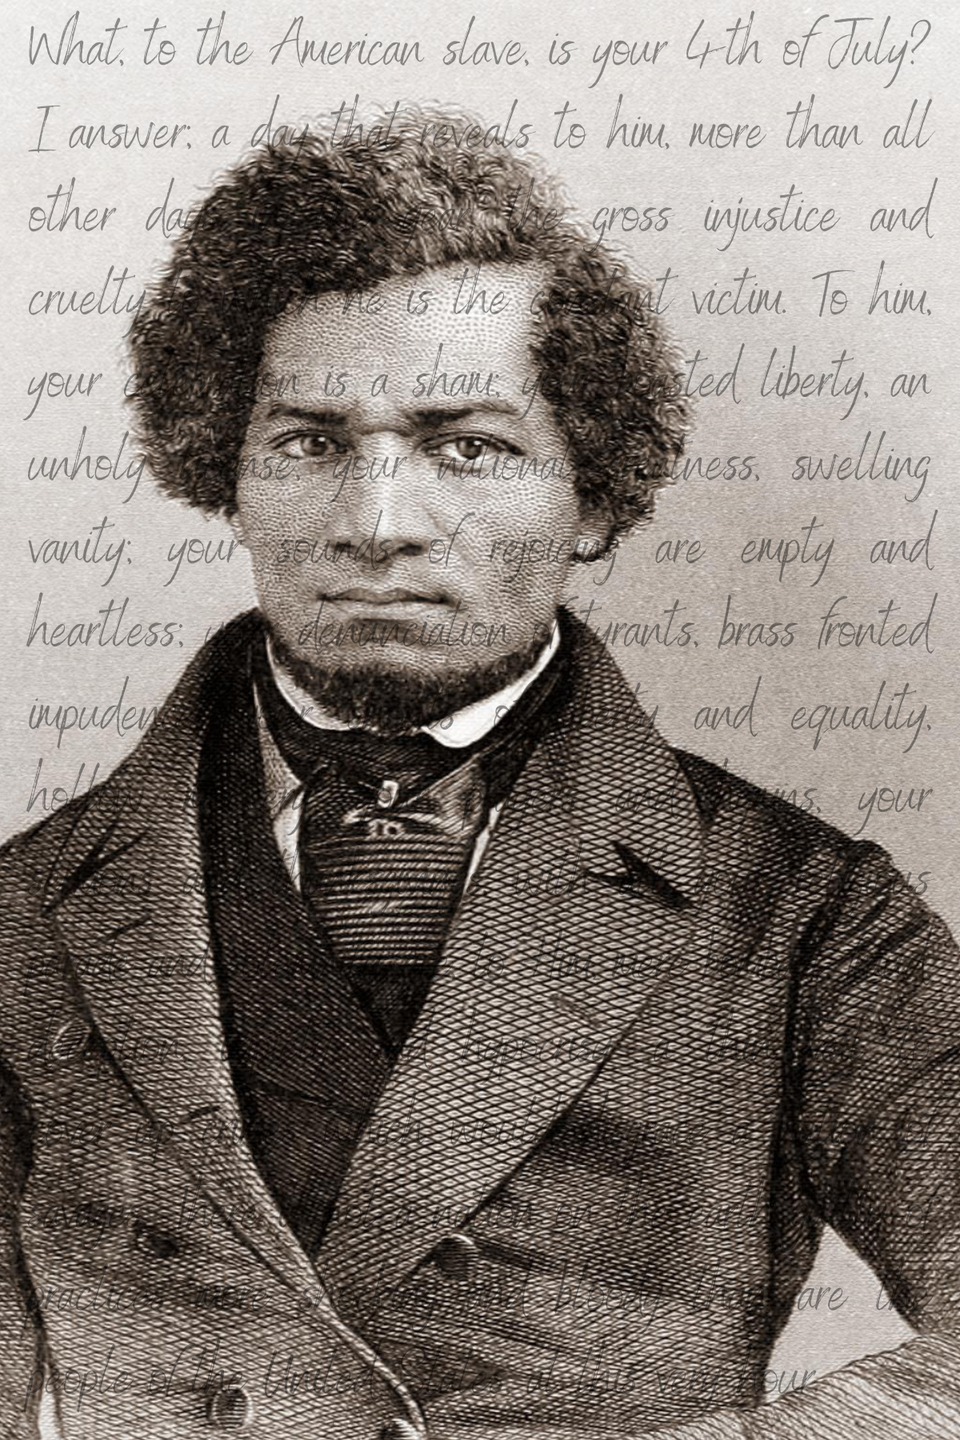 Douglass image with text